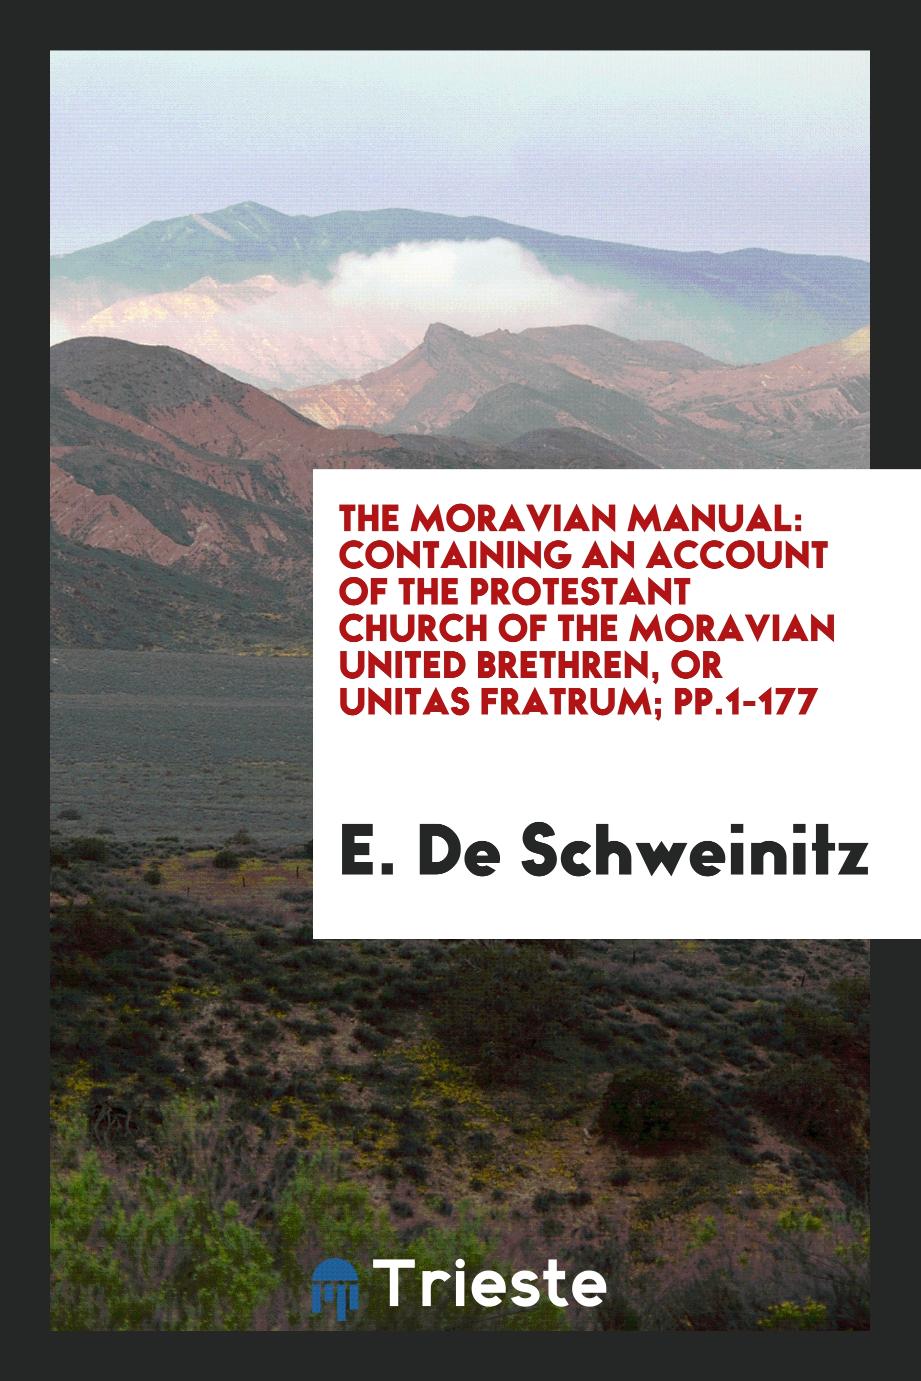 The Moravian Manual: Containing an Account of the Protestant Church of the Moravian United Brethren, or Unitas Fratrum; pp.1-177